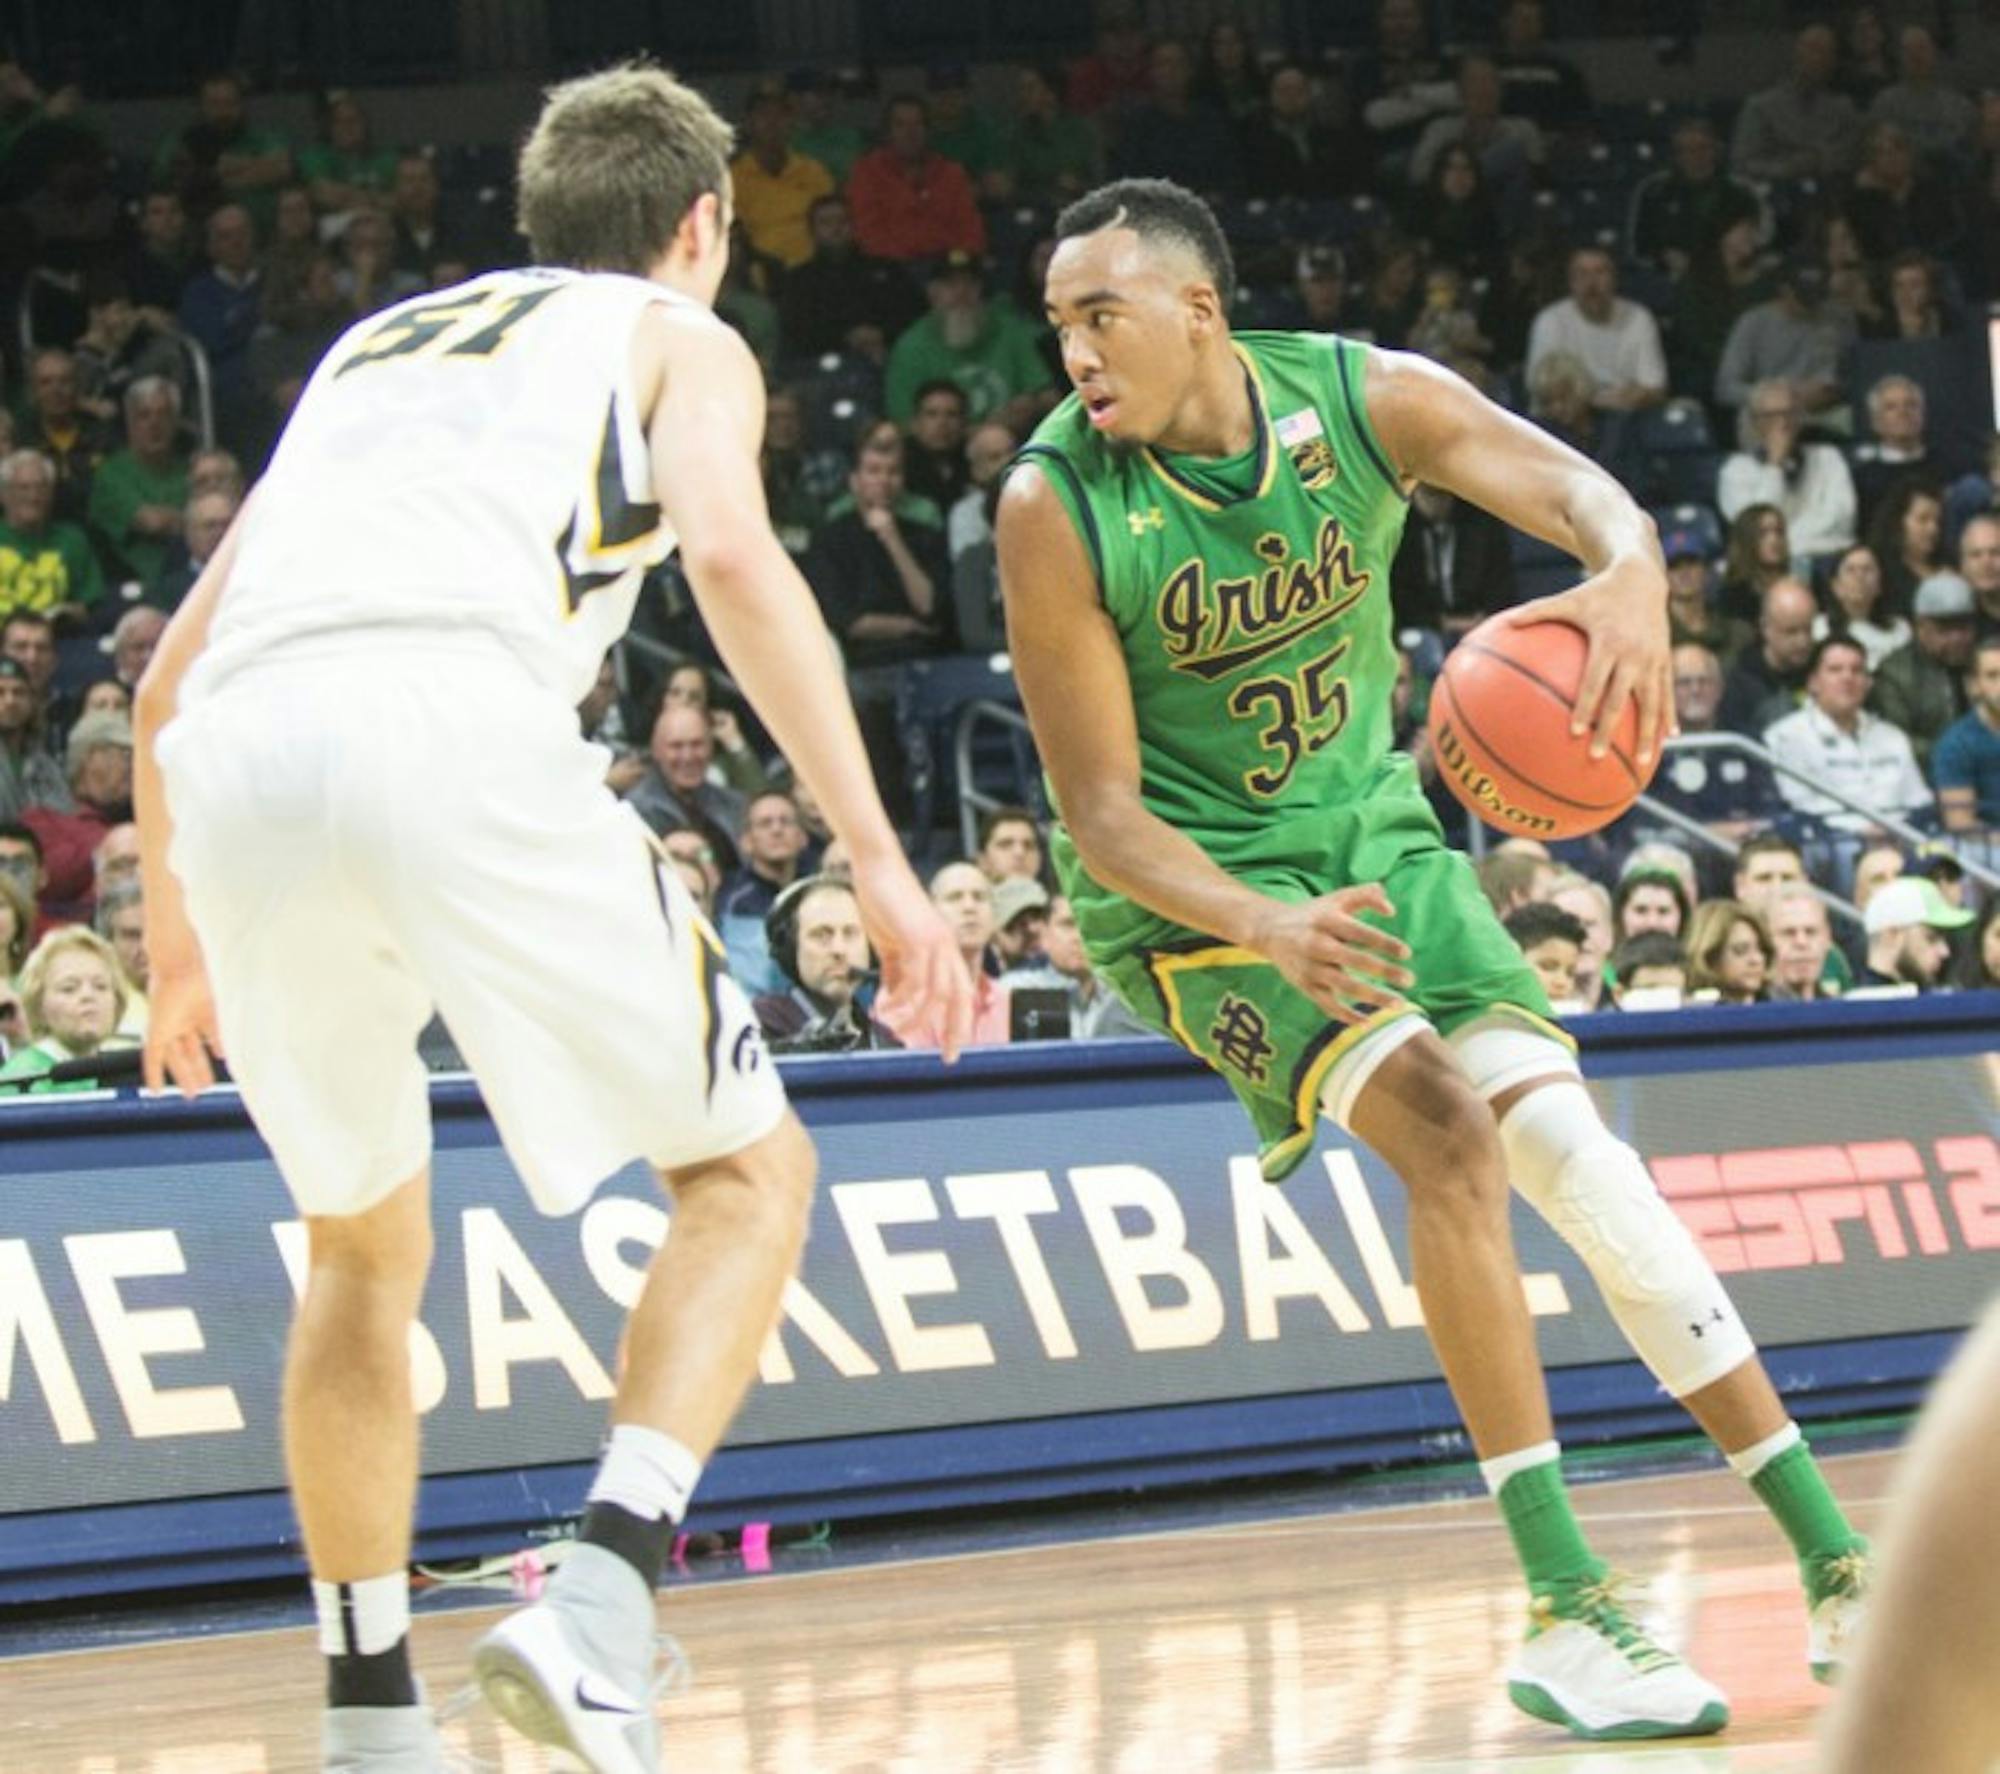 Irish junior forward Bonzie Colson looks to pass during Notre Dame’s 92-78 win against Iowa on Tuesday in Purcell Pavilion. Colson had a career-high 17 rebounds and 22 points in the victory.